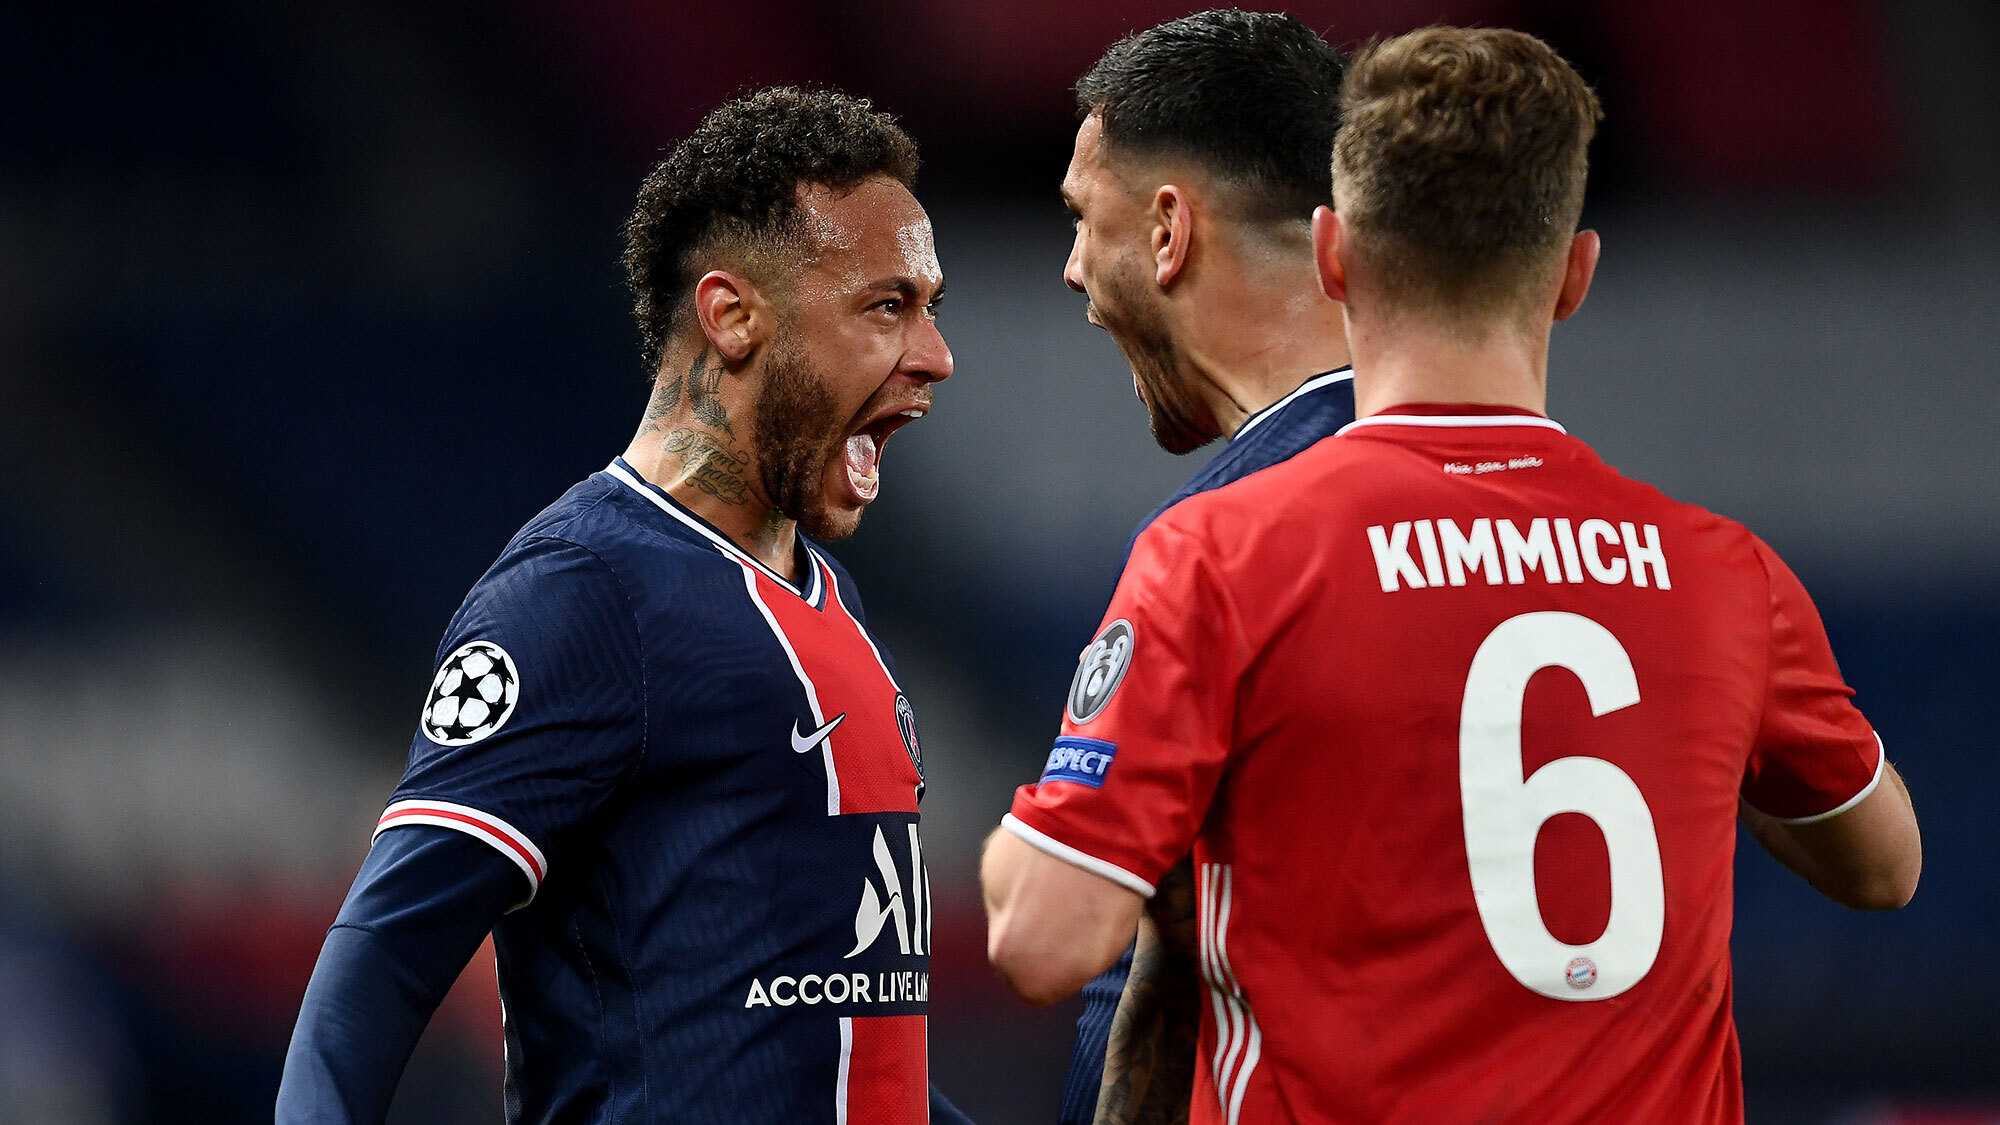 PSG eliminate Bayern from the Champions League, despite losing 1-0 (VIDEO)